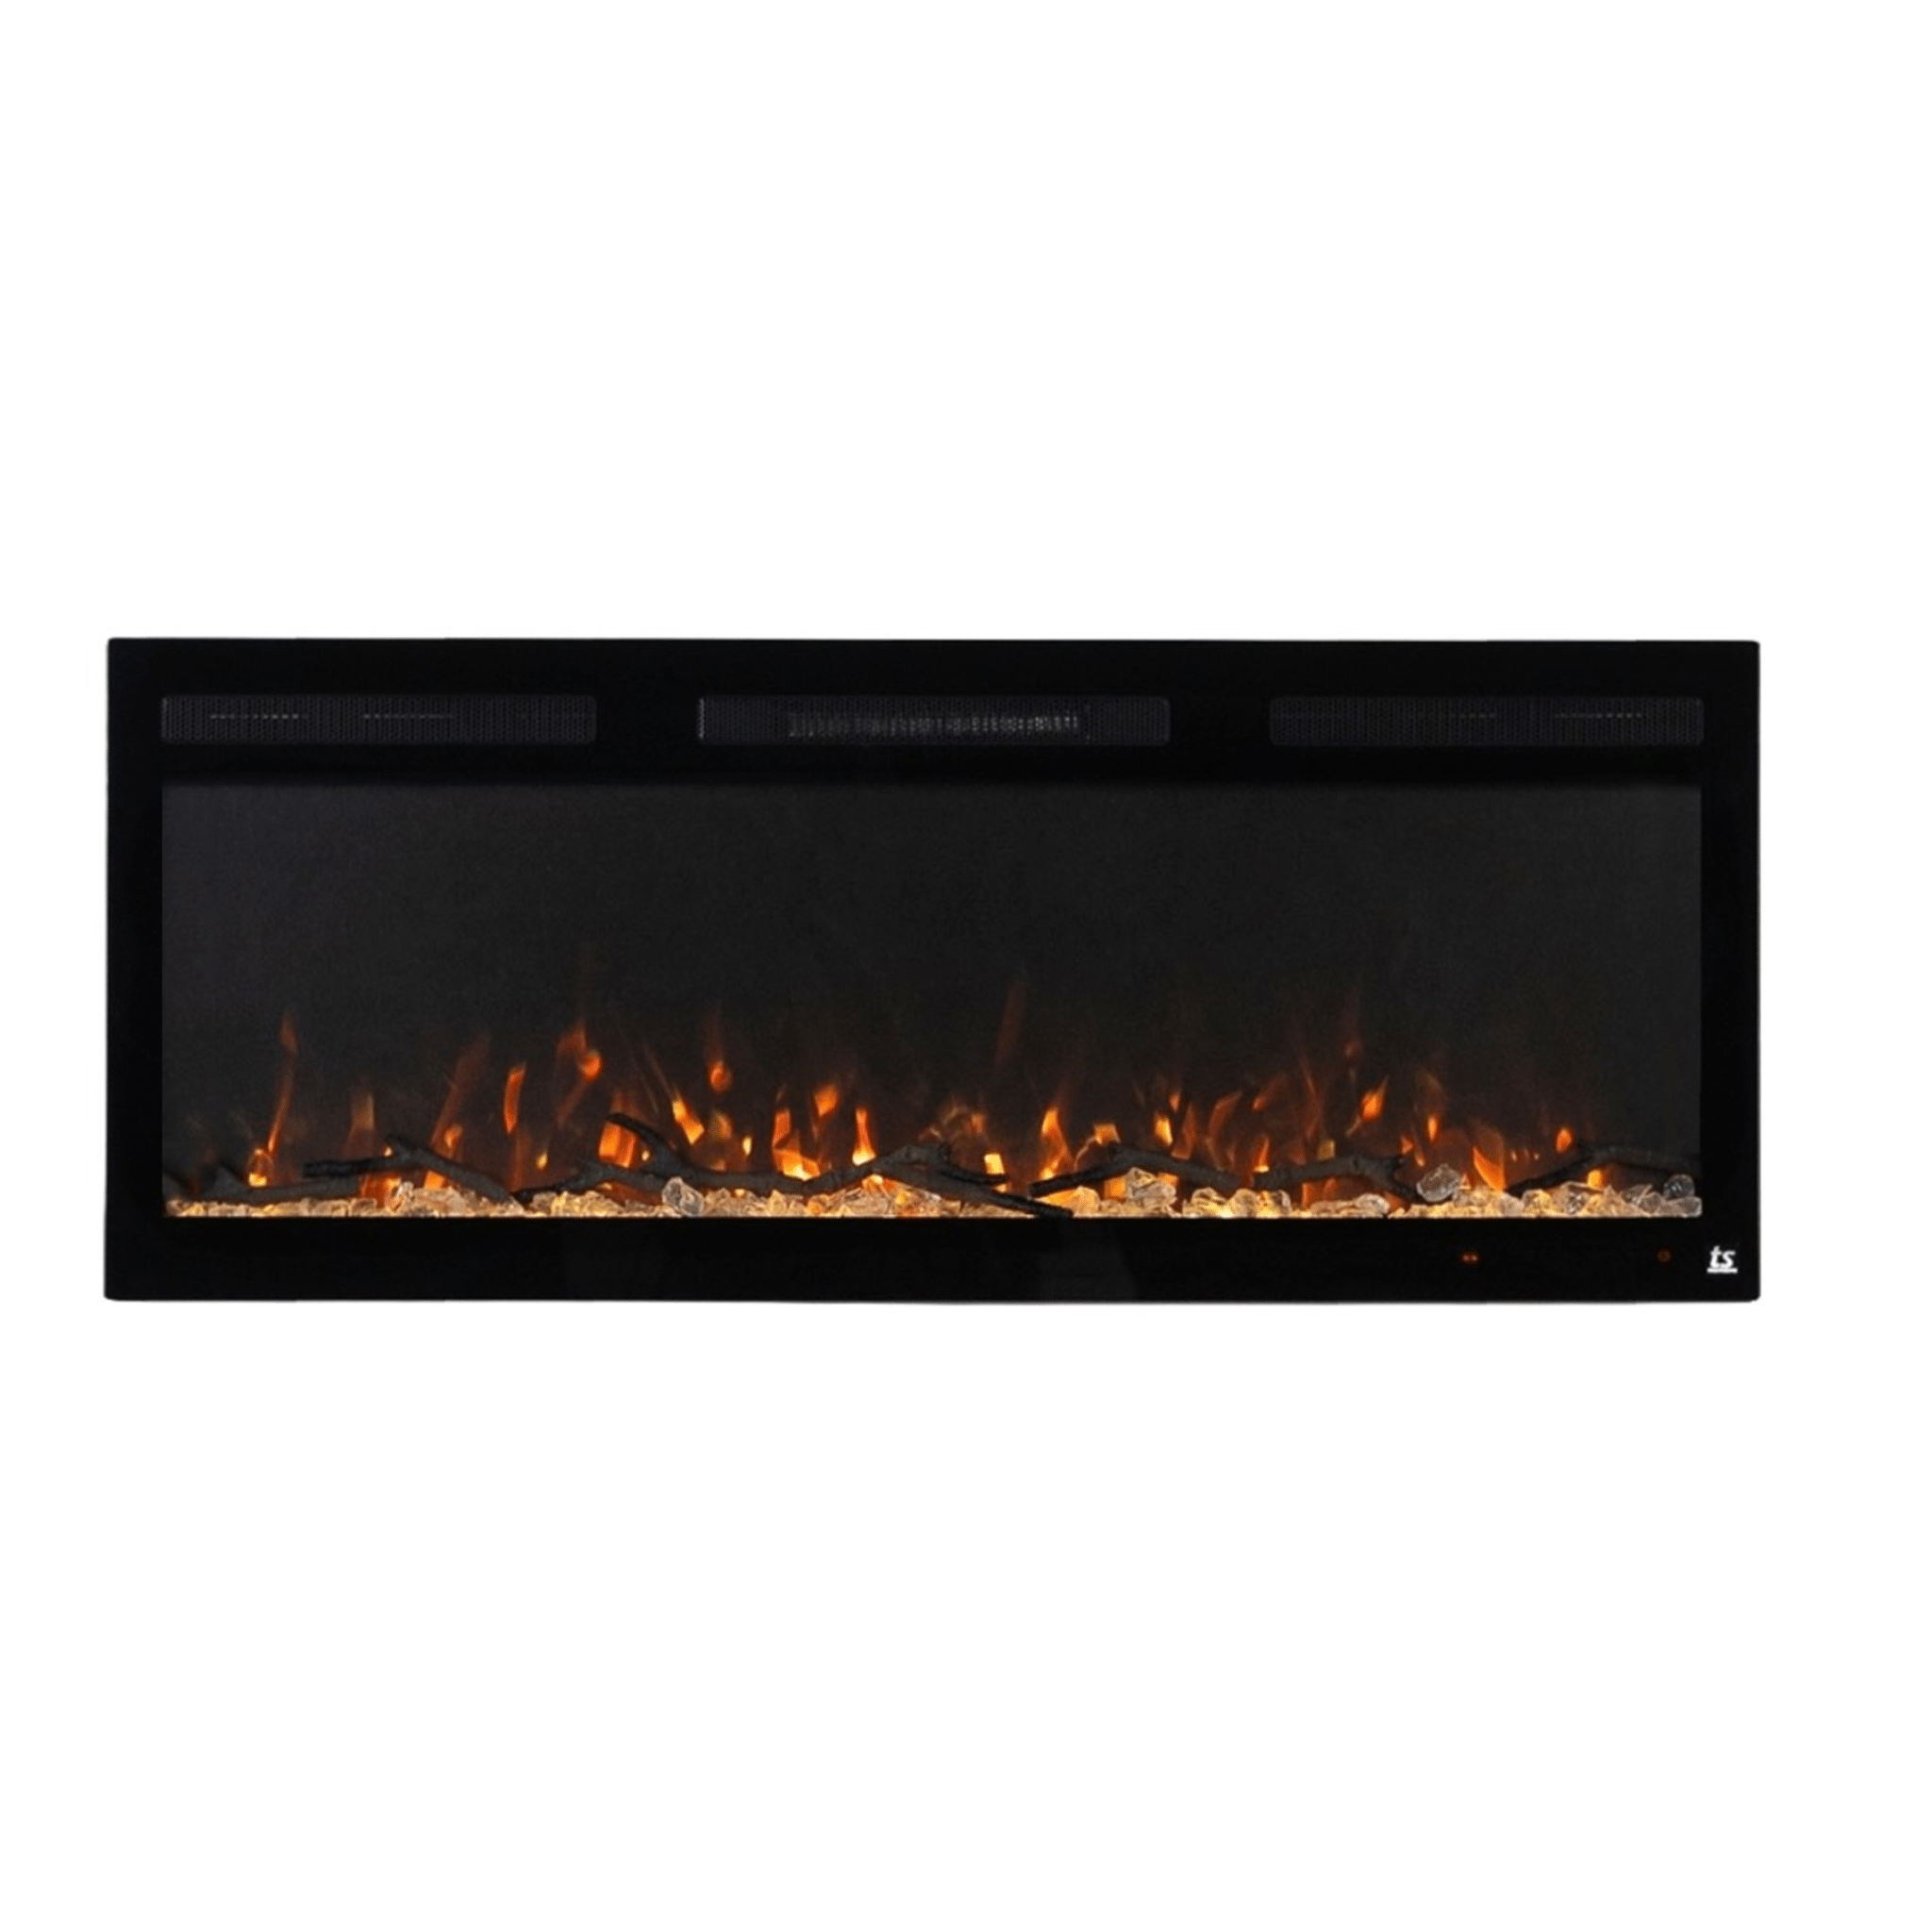 Sideline Fury 65 Inch Electric Fireplace on white background